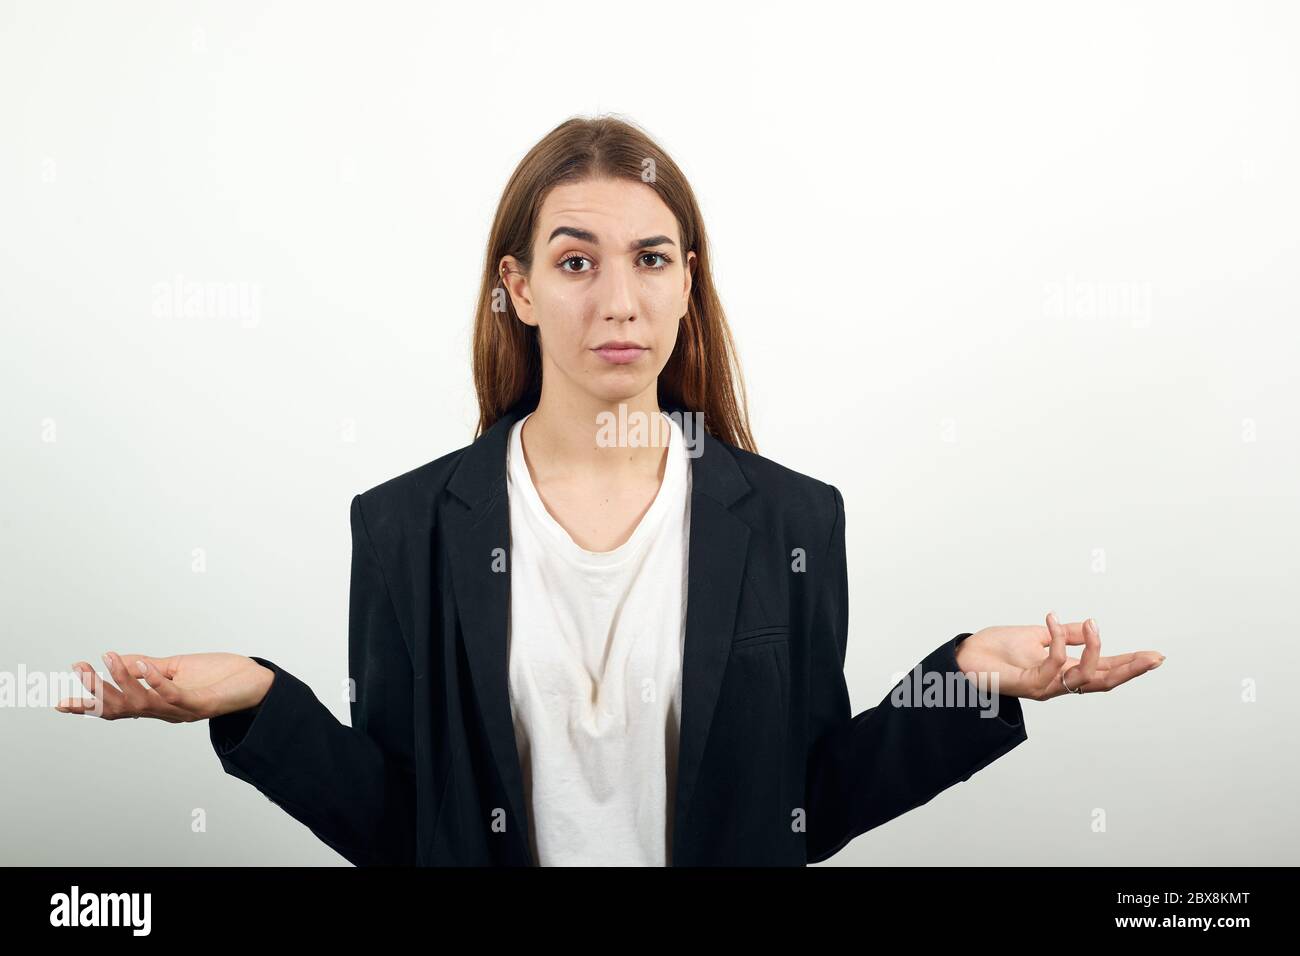 Palms up, place product here, raising arms wide spread is catching something. Stock Photo